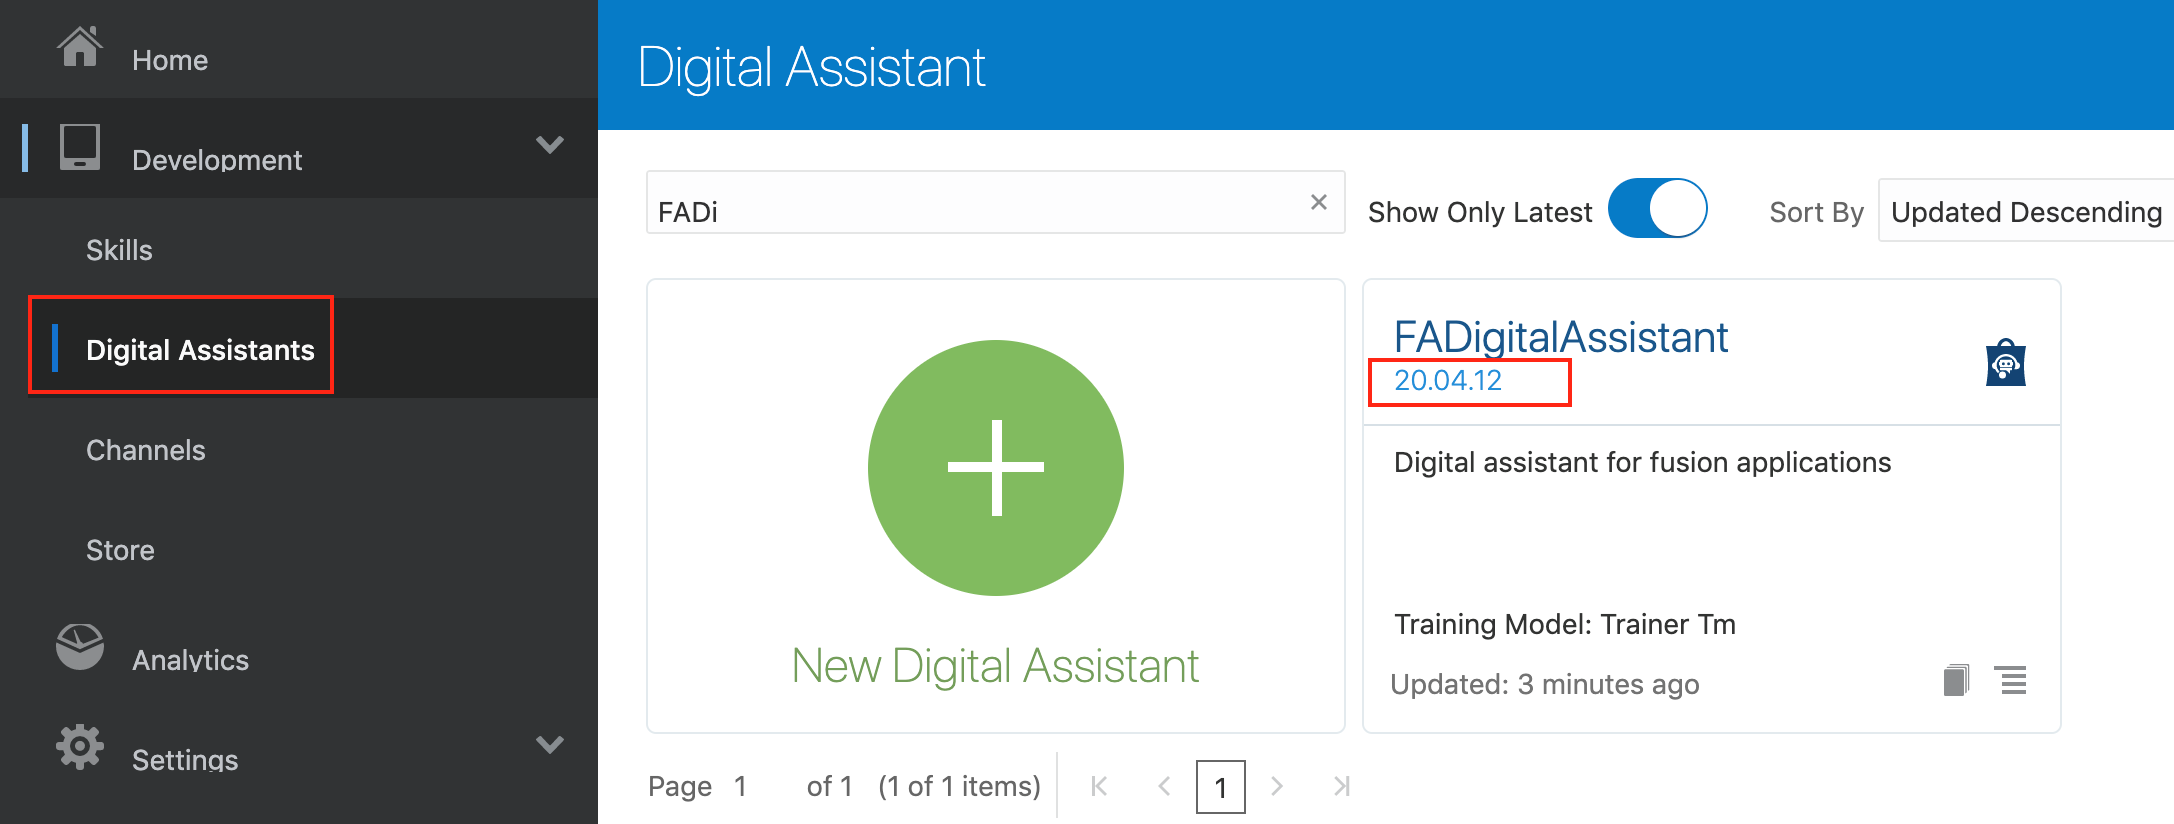 A screenshot of the Digital Assistants page, including a tile for FADigitalAssistant